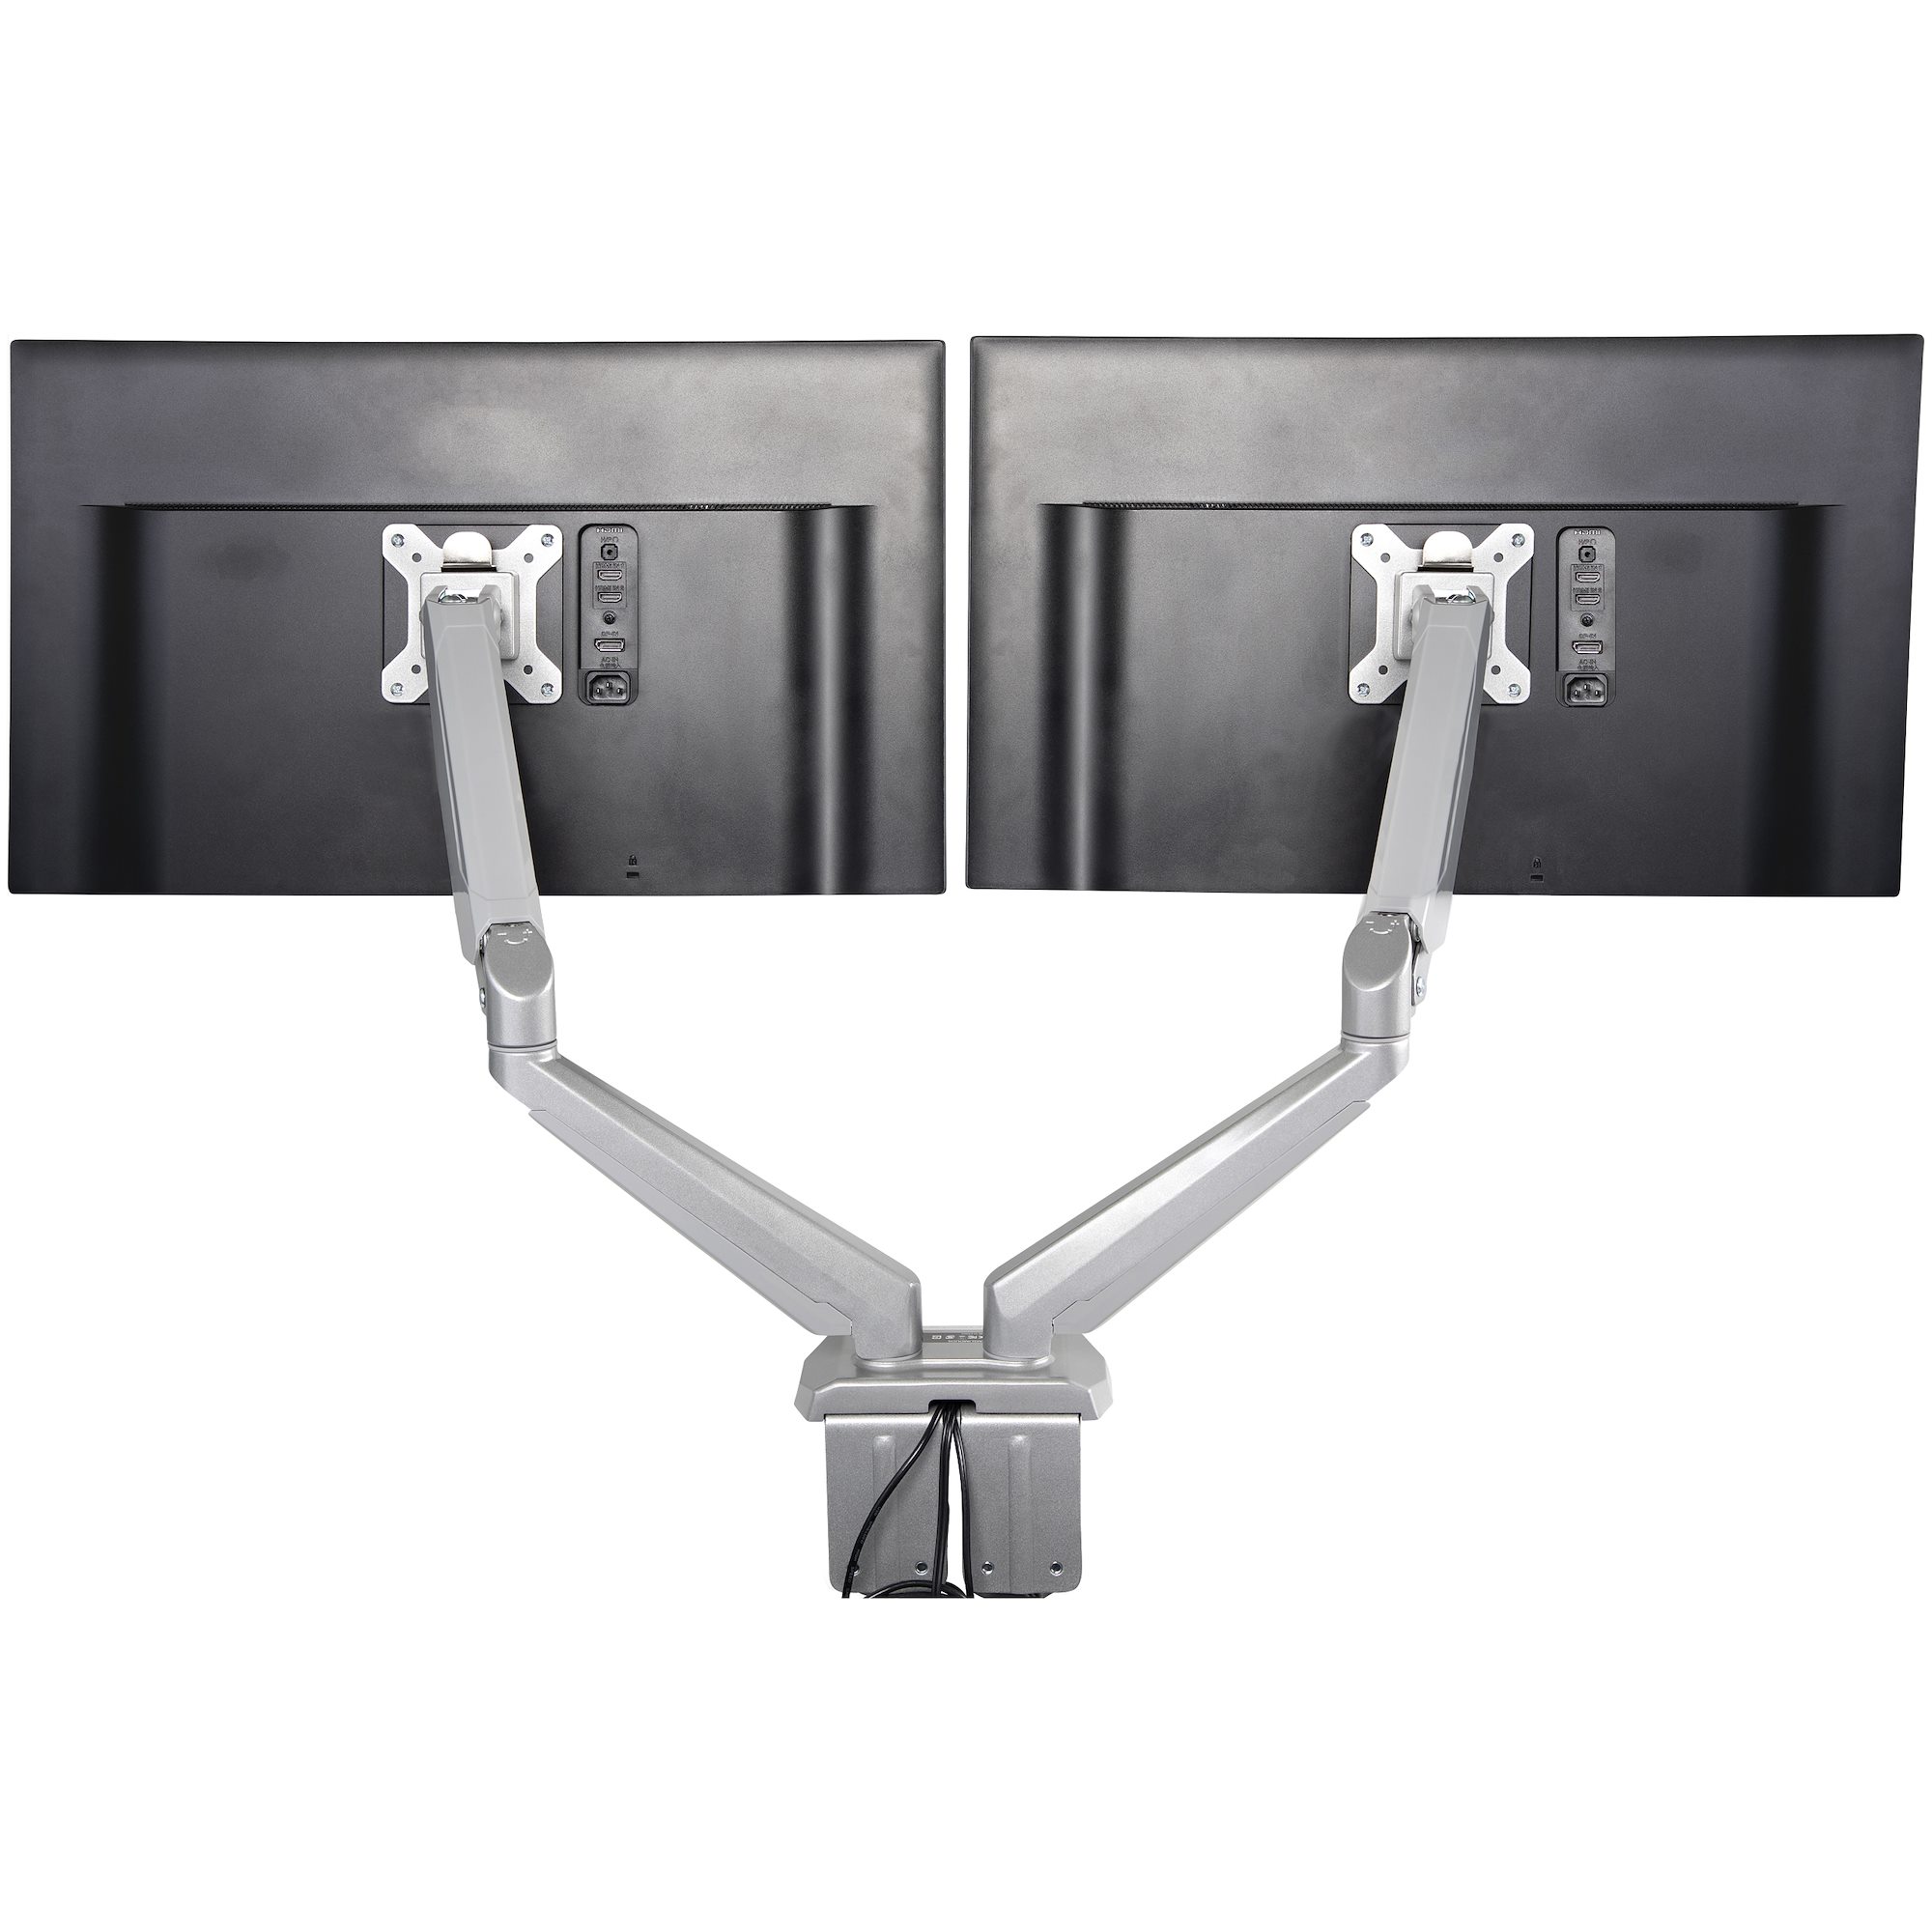 StarTech.com Wall Mount Dual Monitor Arm Articulating Ergonomic VESA Wall  Mount for 2x 24 Screens Synchronized Adjustable Crossbar VESA  75x75100x100mm dual computer monitor wall mount for 2 displays up to 24in  and